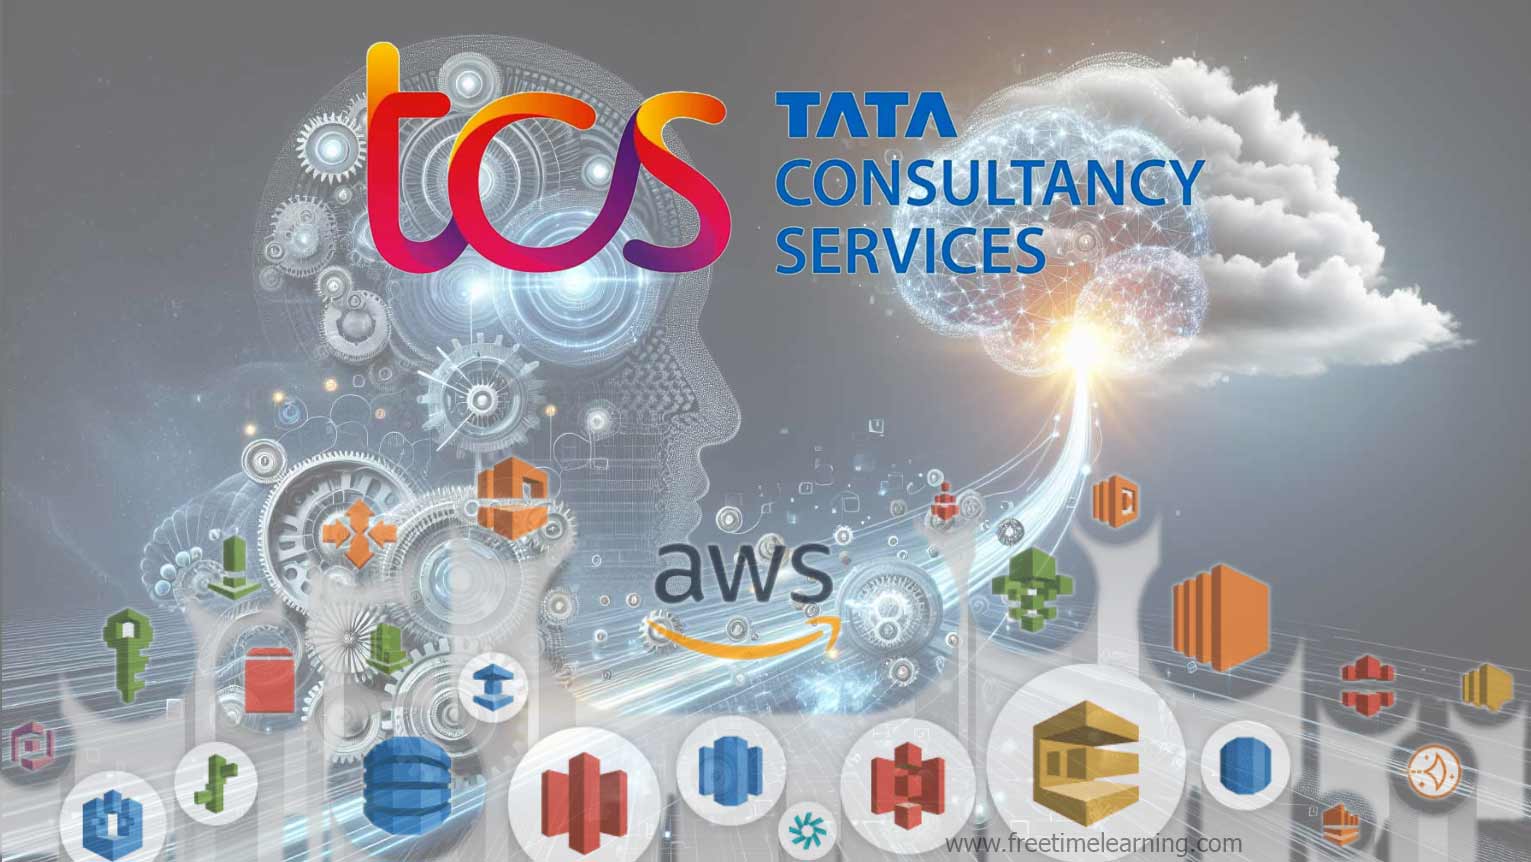 TCS Partners with AWS to to launch Gen AI Capabilities for Enterprises